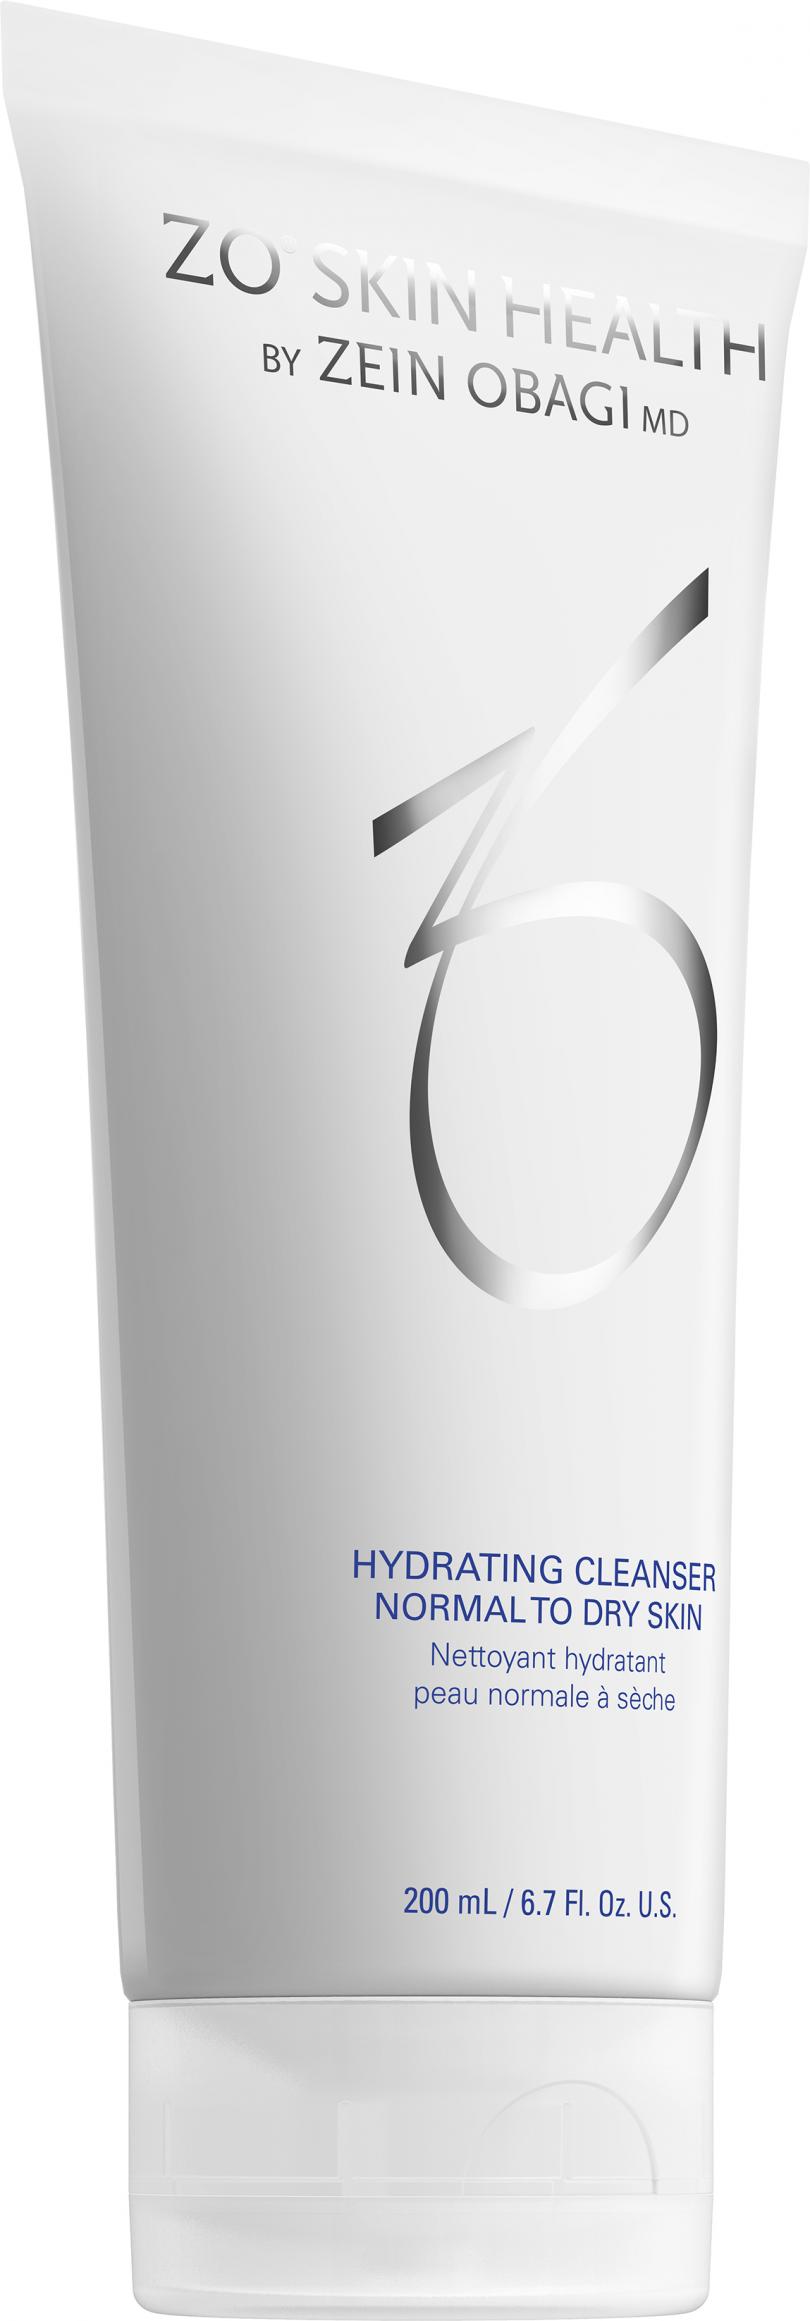 Hydrating Cleanser Normal to Dry Skin 200ml